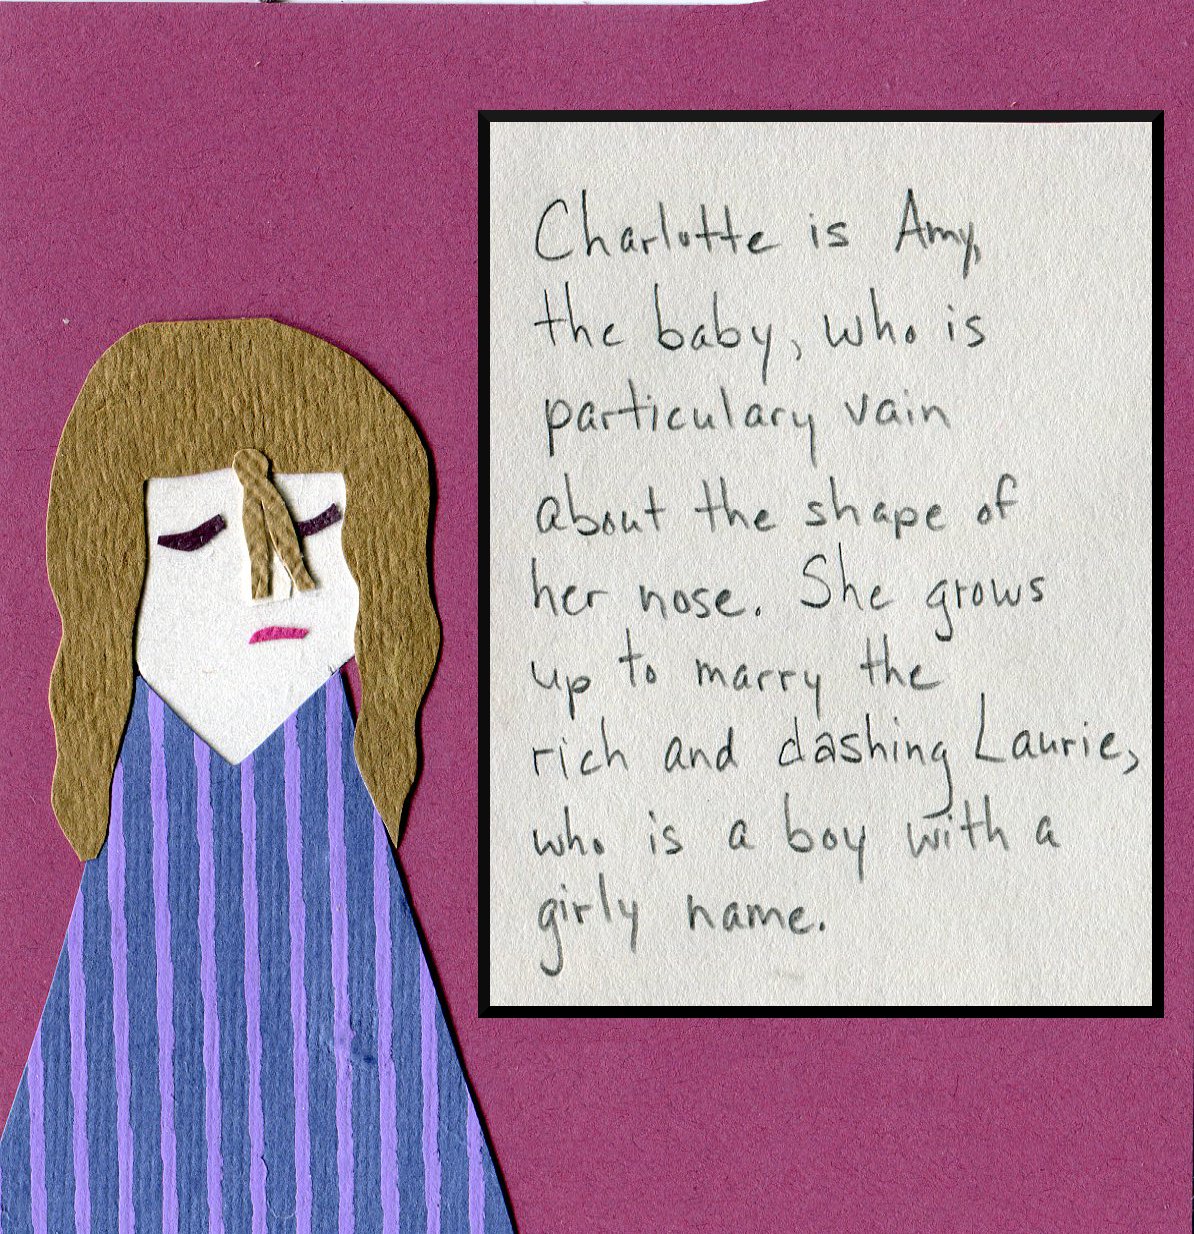 "Charlotte is Amy, the baby, who is particularly vain about the shape of her nose. She grows up to marry the rich and dashing Laurie, who is a boy with a girly name."